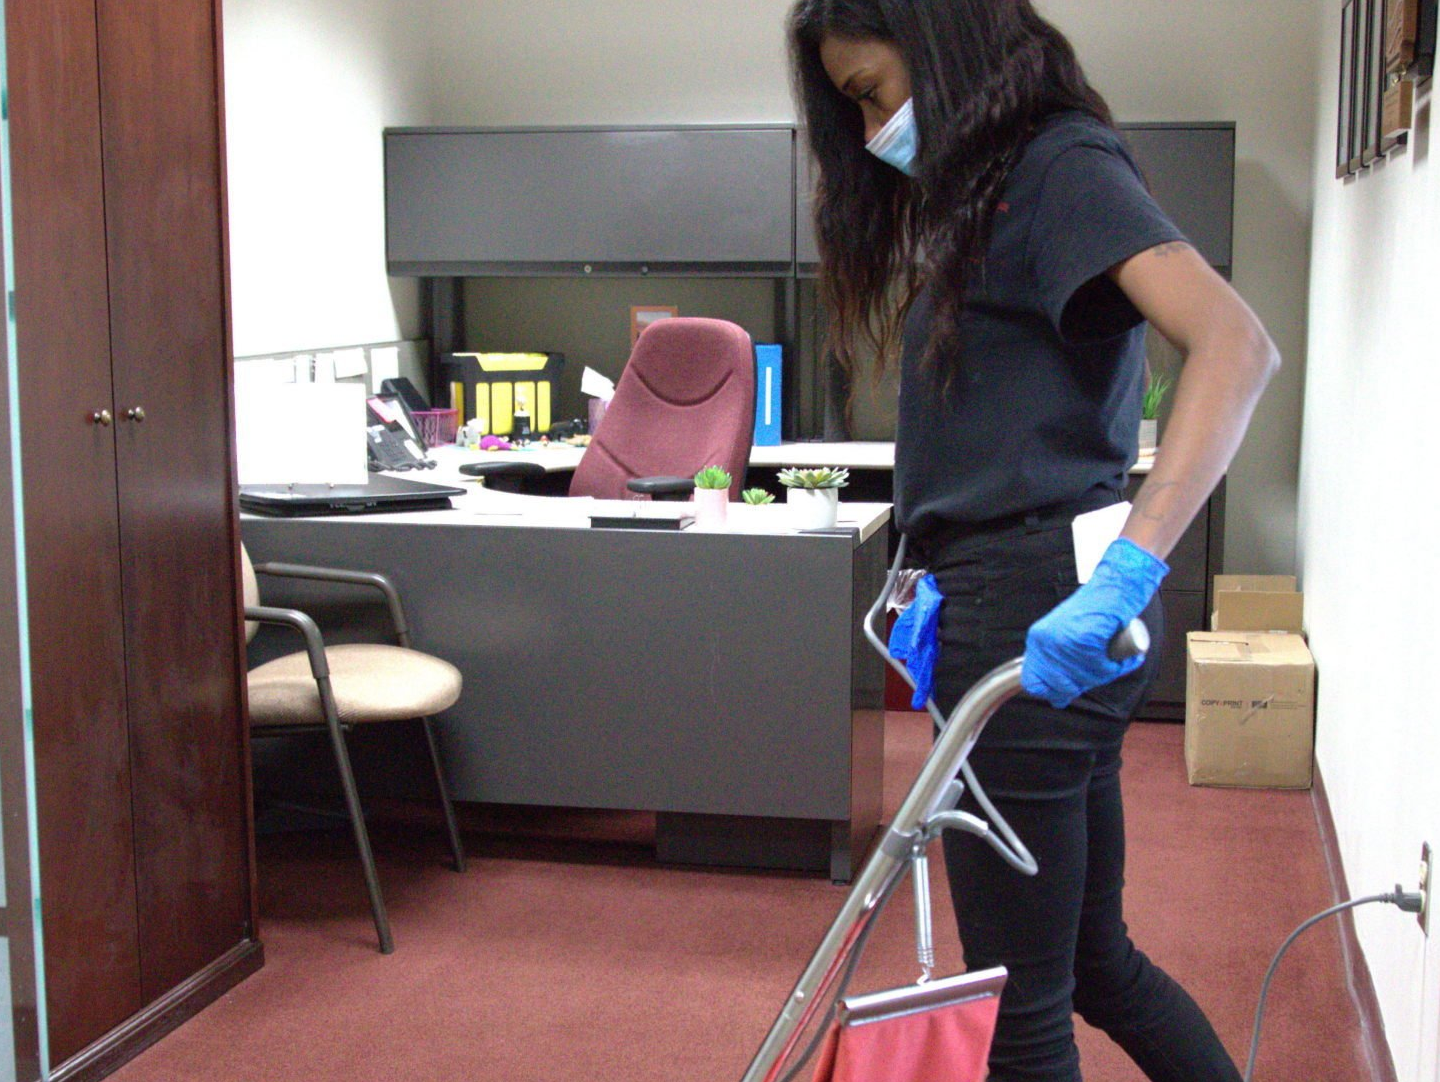 a woman with black shirt cleaning up a room